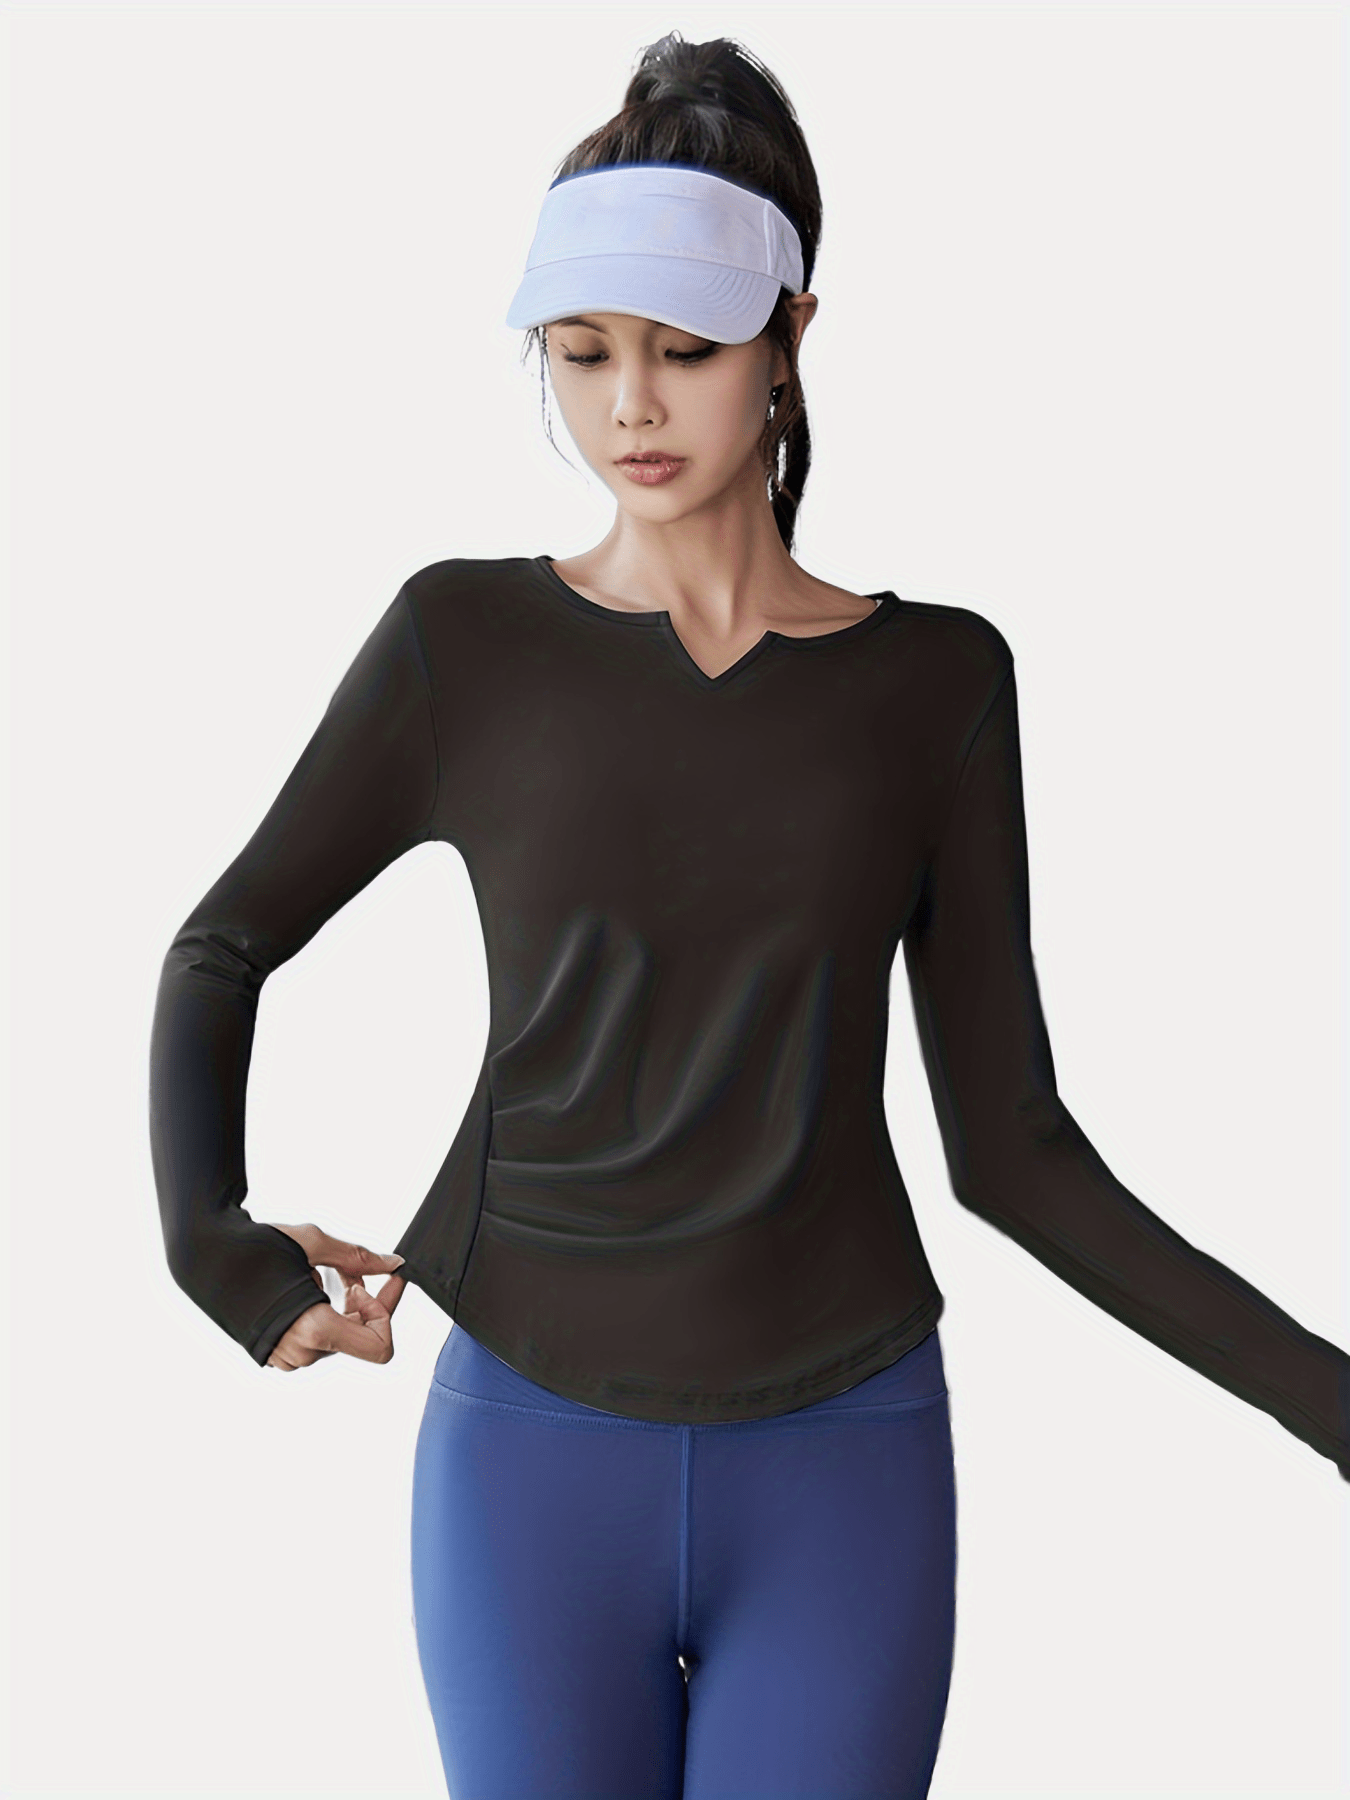 Long Sleeve Workout Shirts for Women Yoga Tops for Women， Loose fit Yoga  Shirts for Women with Thumb Hole，Ladies Long Sleeve Moisture Wicking  Athletic Shirts - …